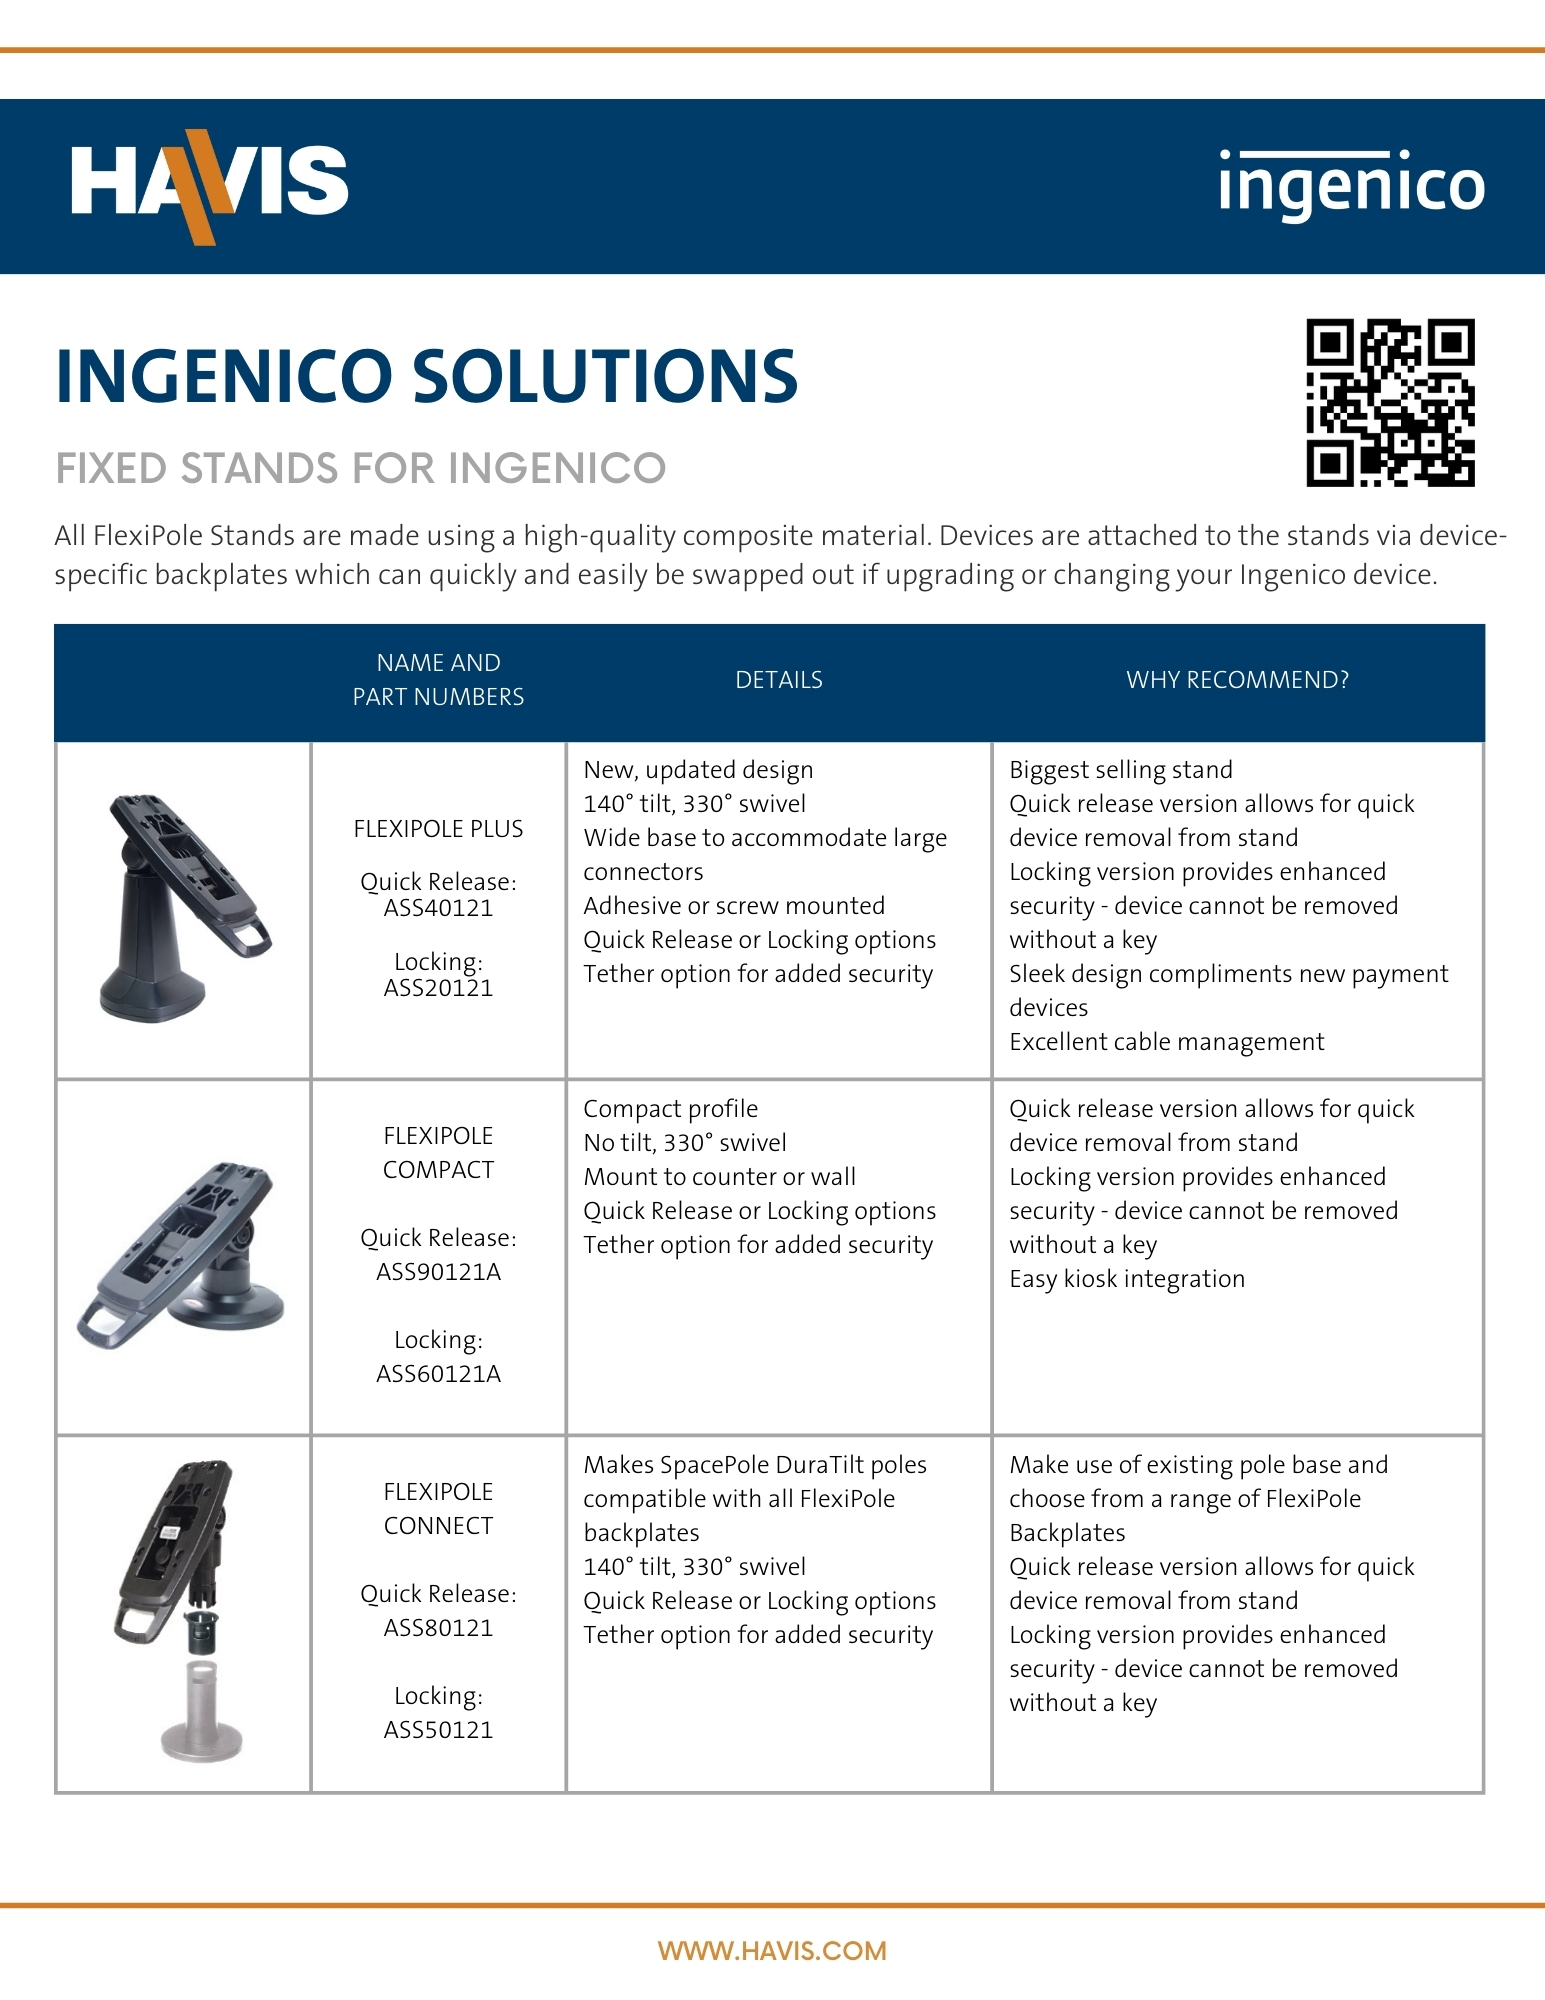 Havis Solutions for Ingenico (Quick Reference Guide)